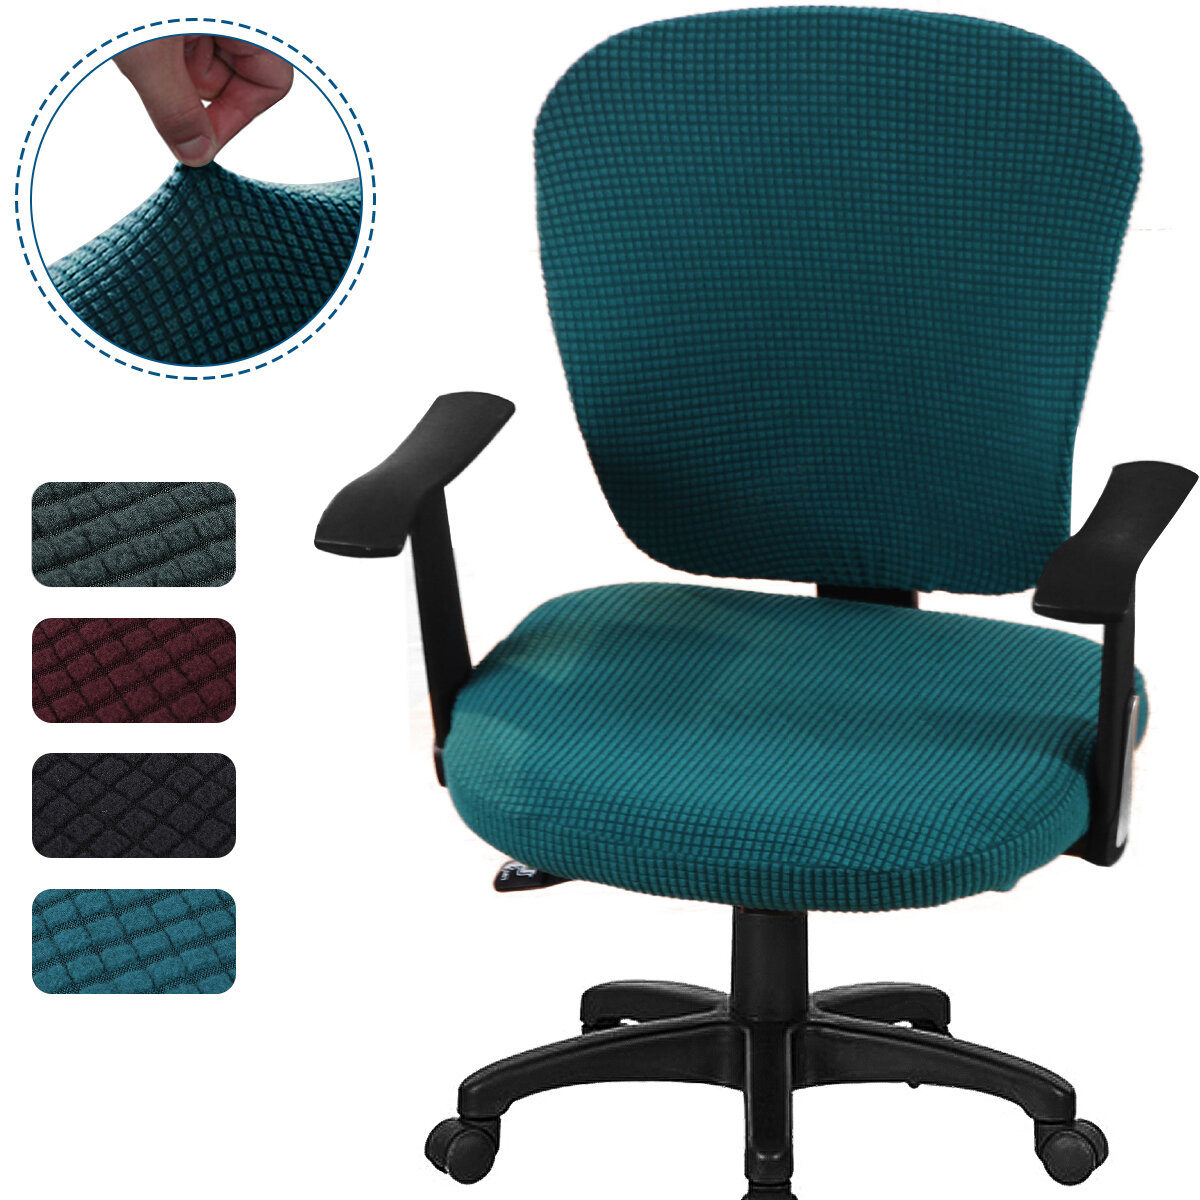 

2Pcs/set Elastic Office Chair Cover Corn Fleece Computer Rotating Chair Protector Stretch Armchair Seat Slipcover Home O